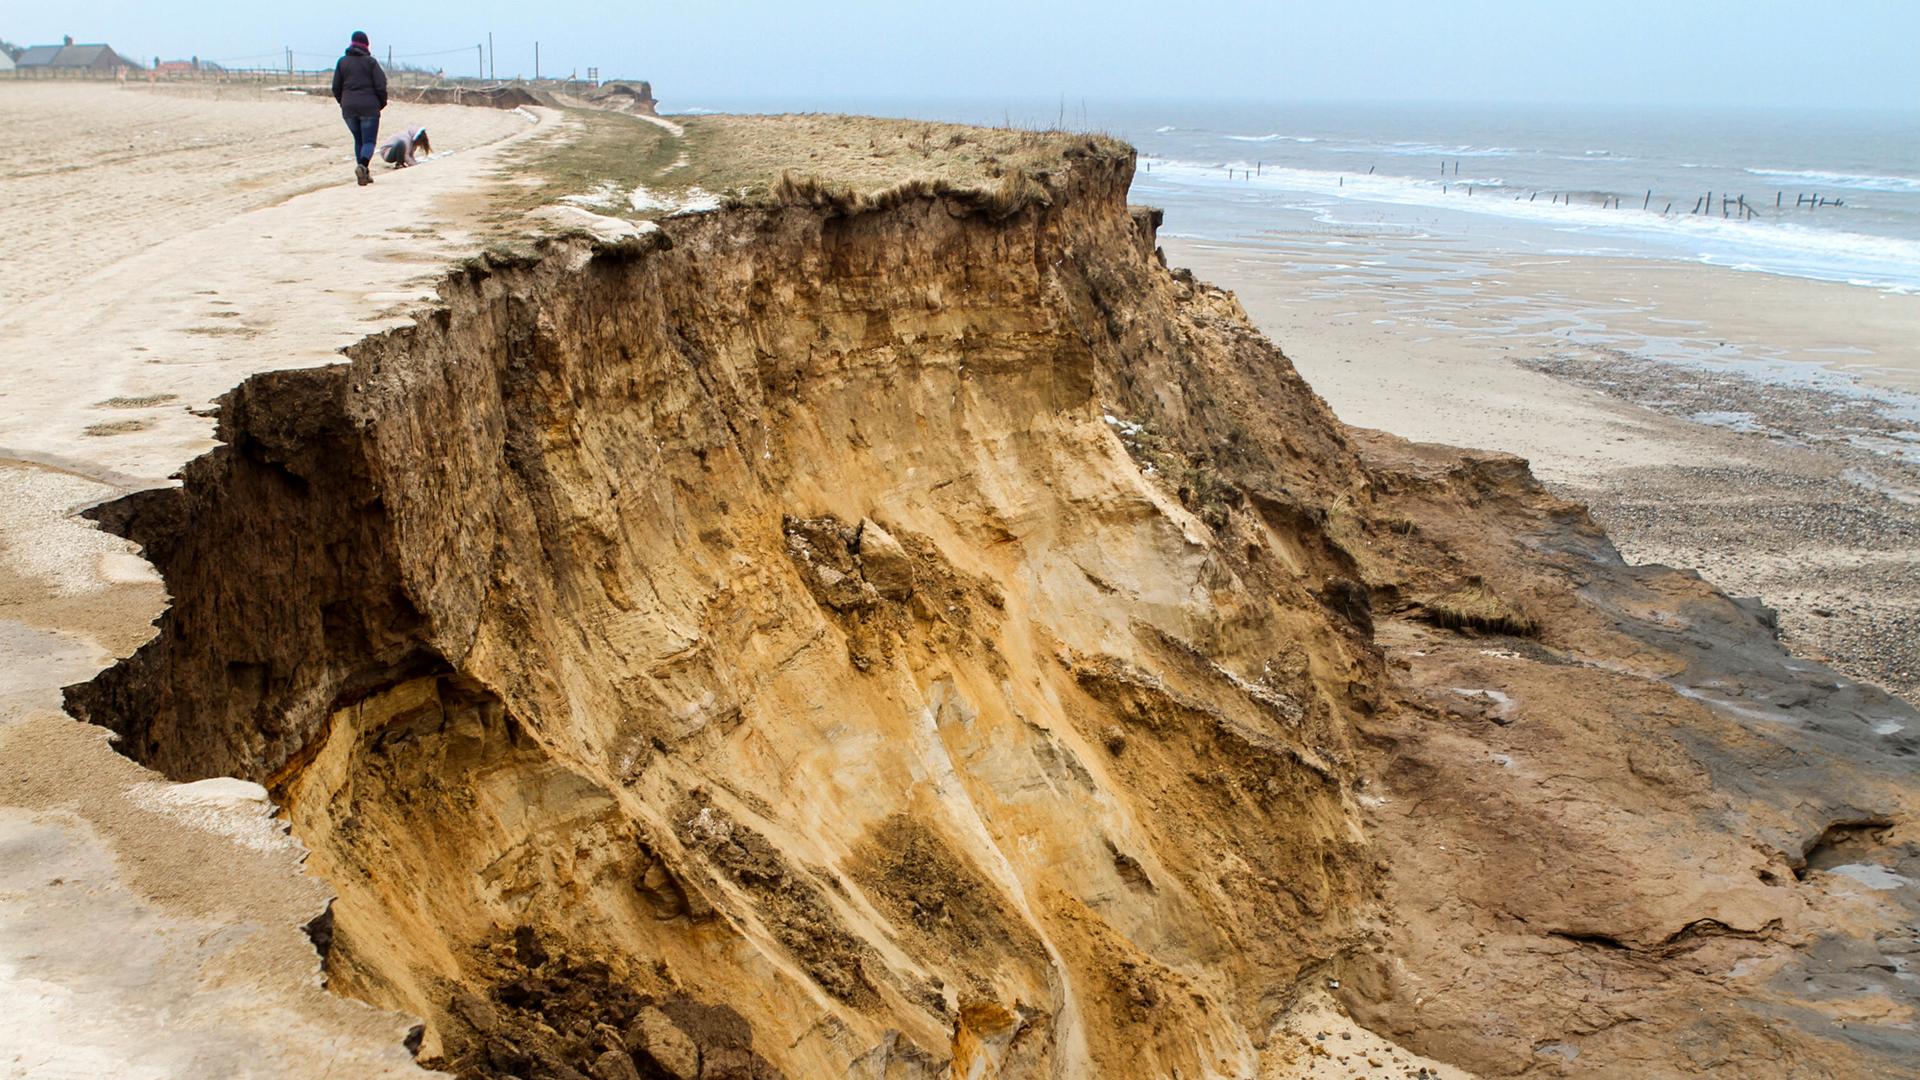 Eroded cliffs in Happisburgh